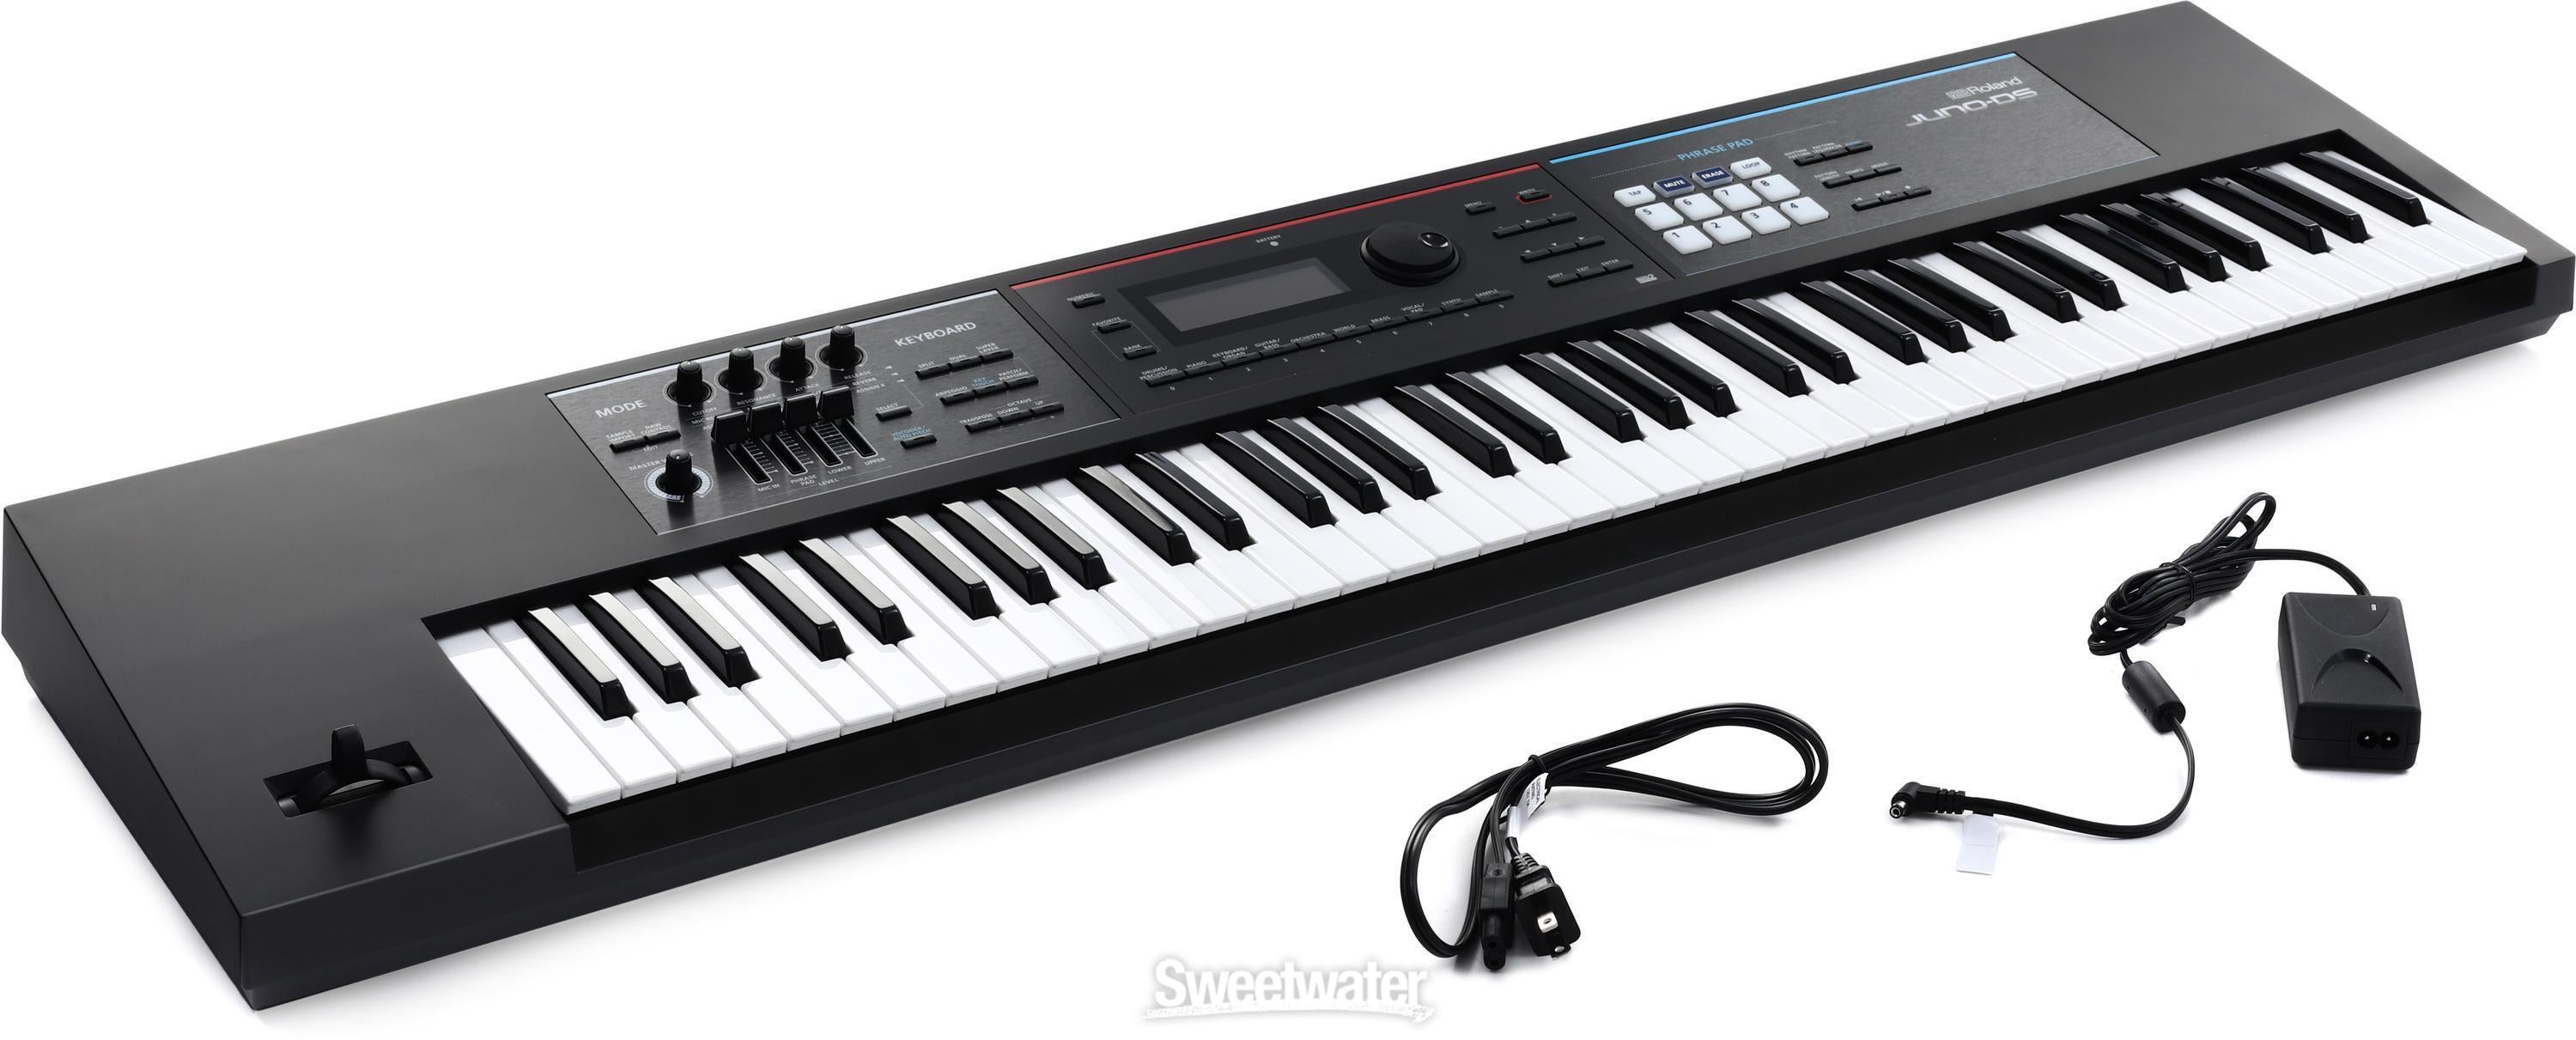 Roland JUNO-DS76 76-key Synthesizer | Sweetwater